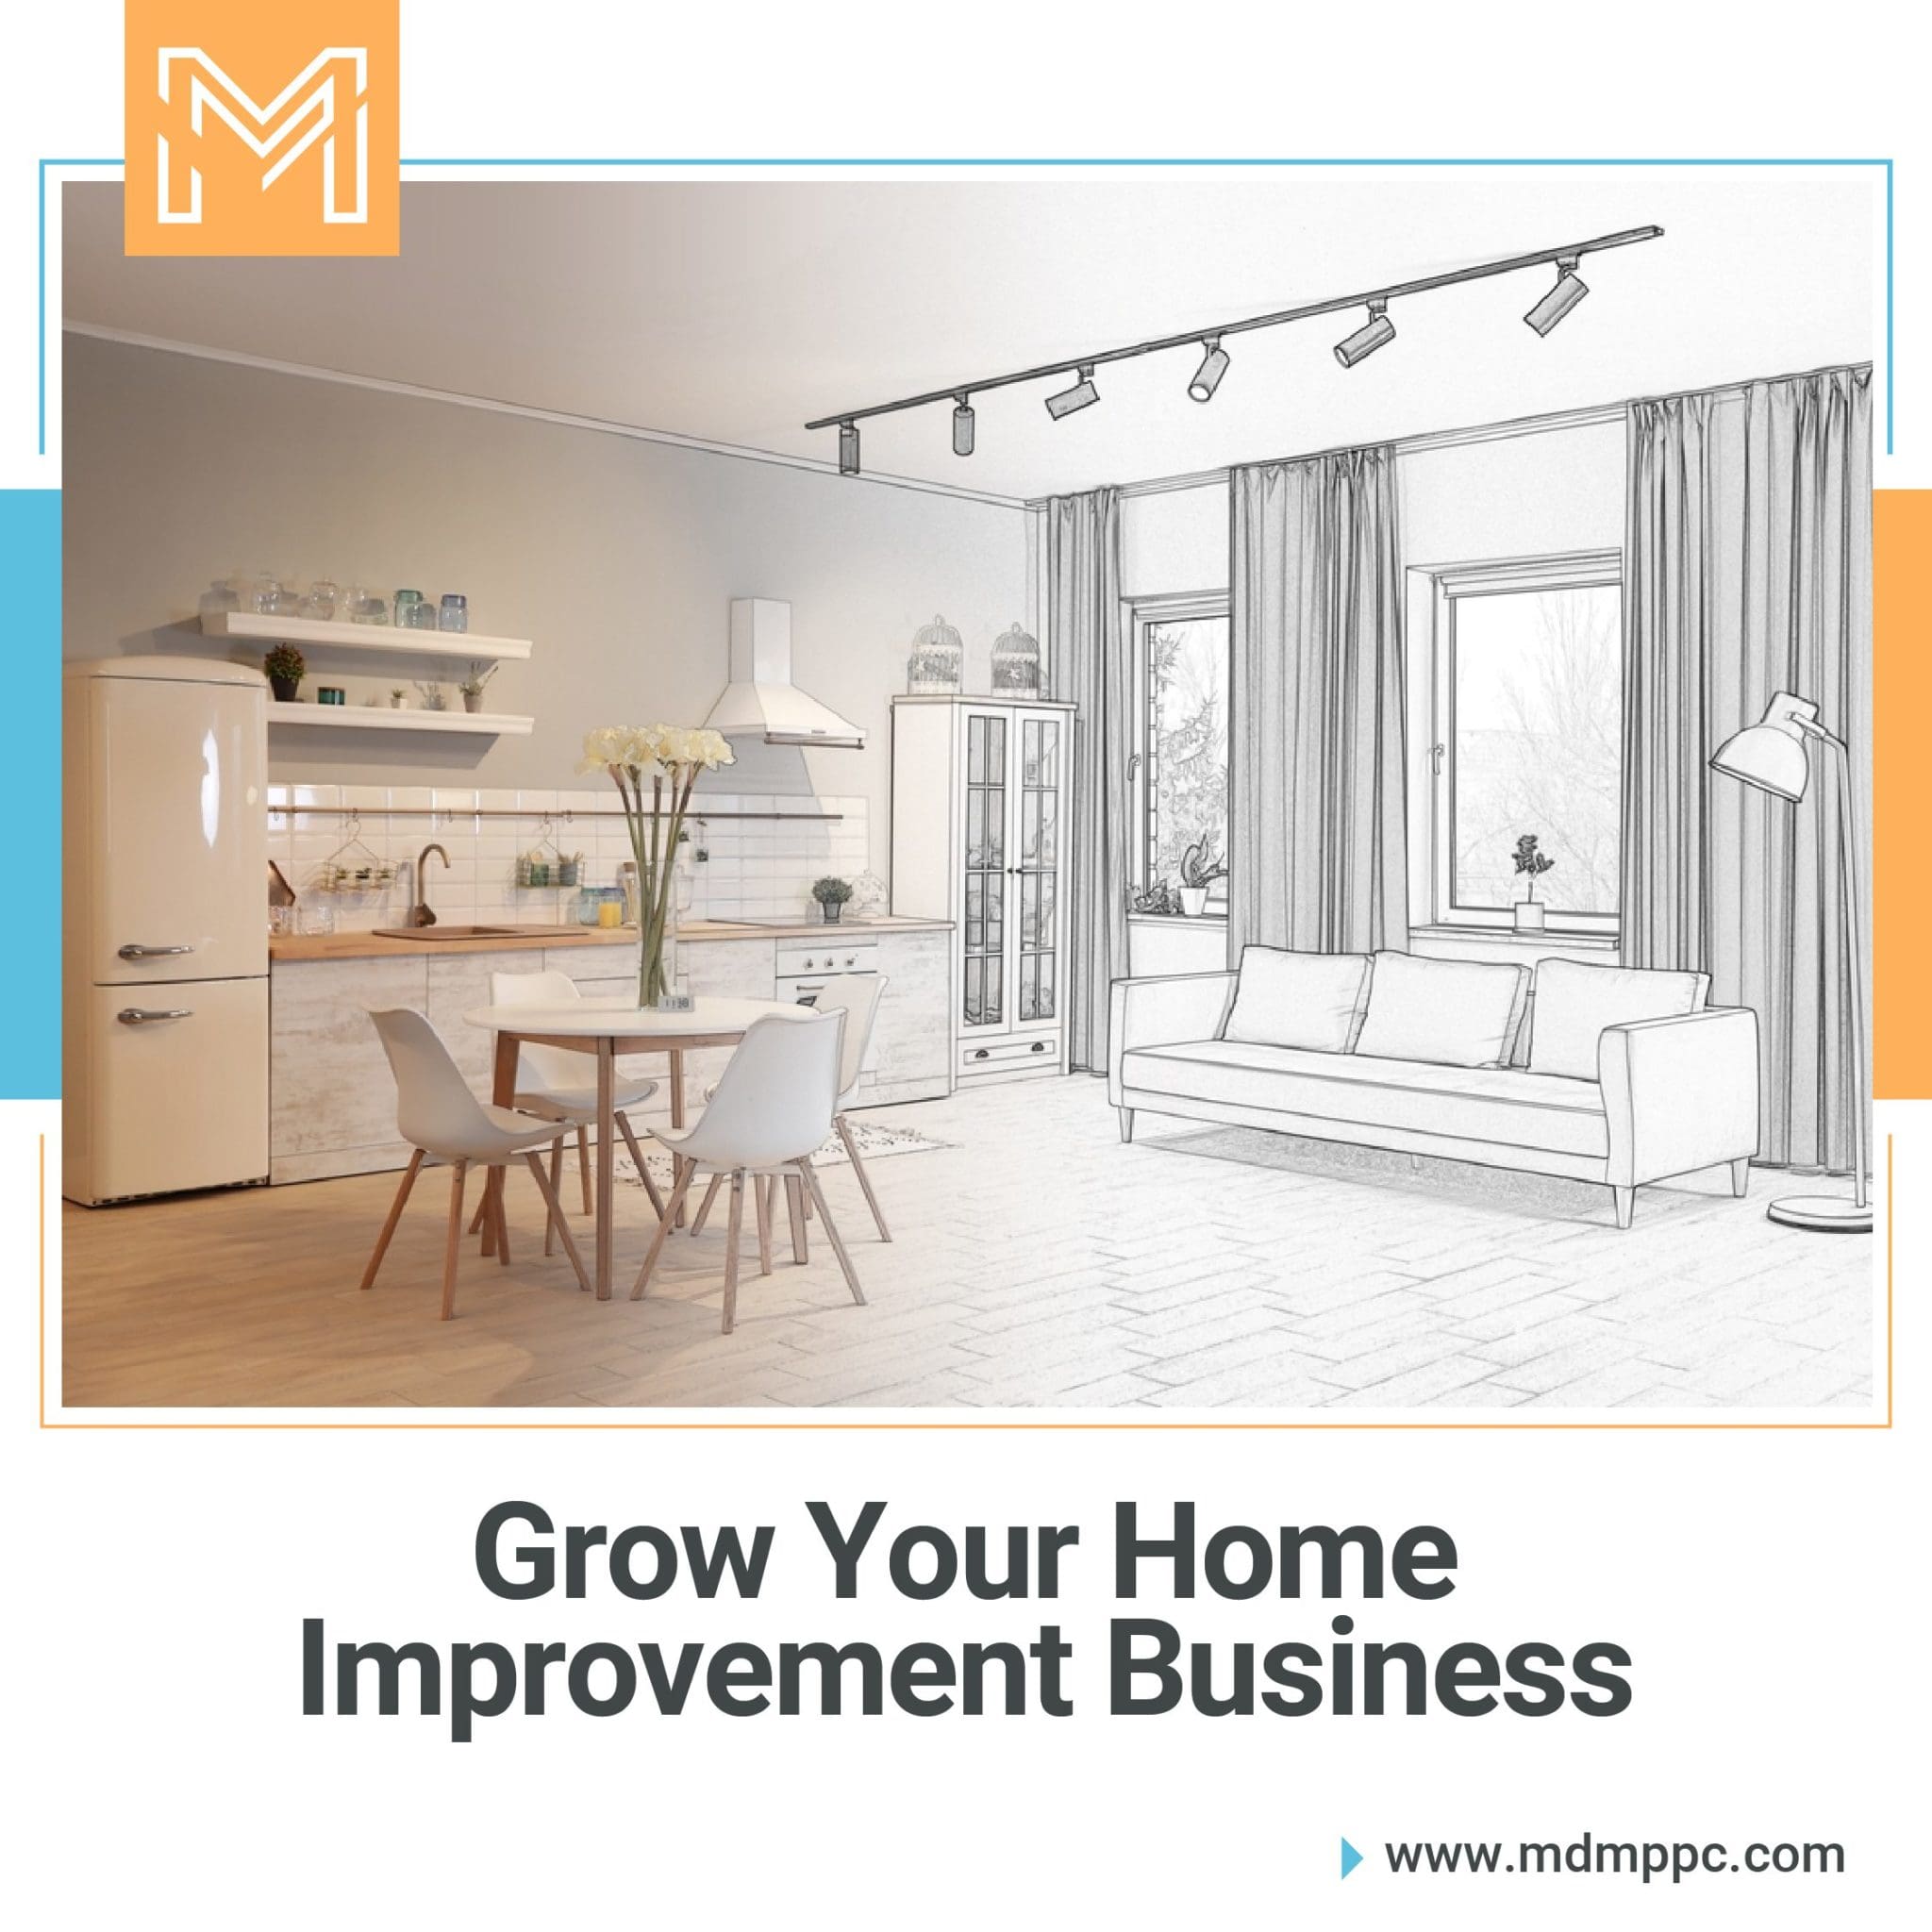 5 Simple Digital Marketing Methods to Grow Your Home Improvement Business